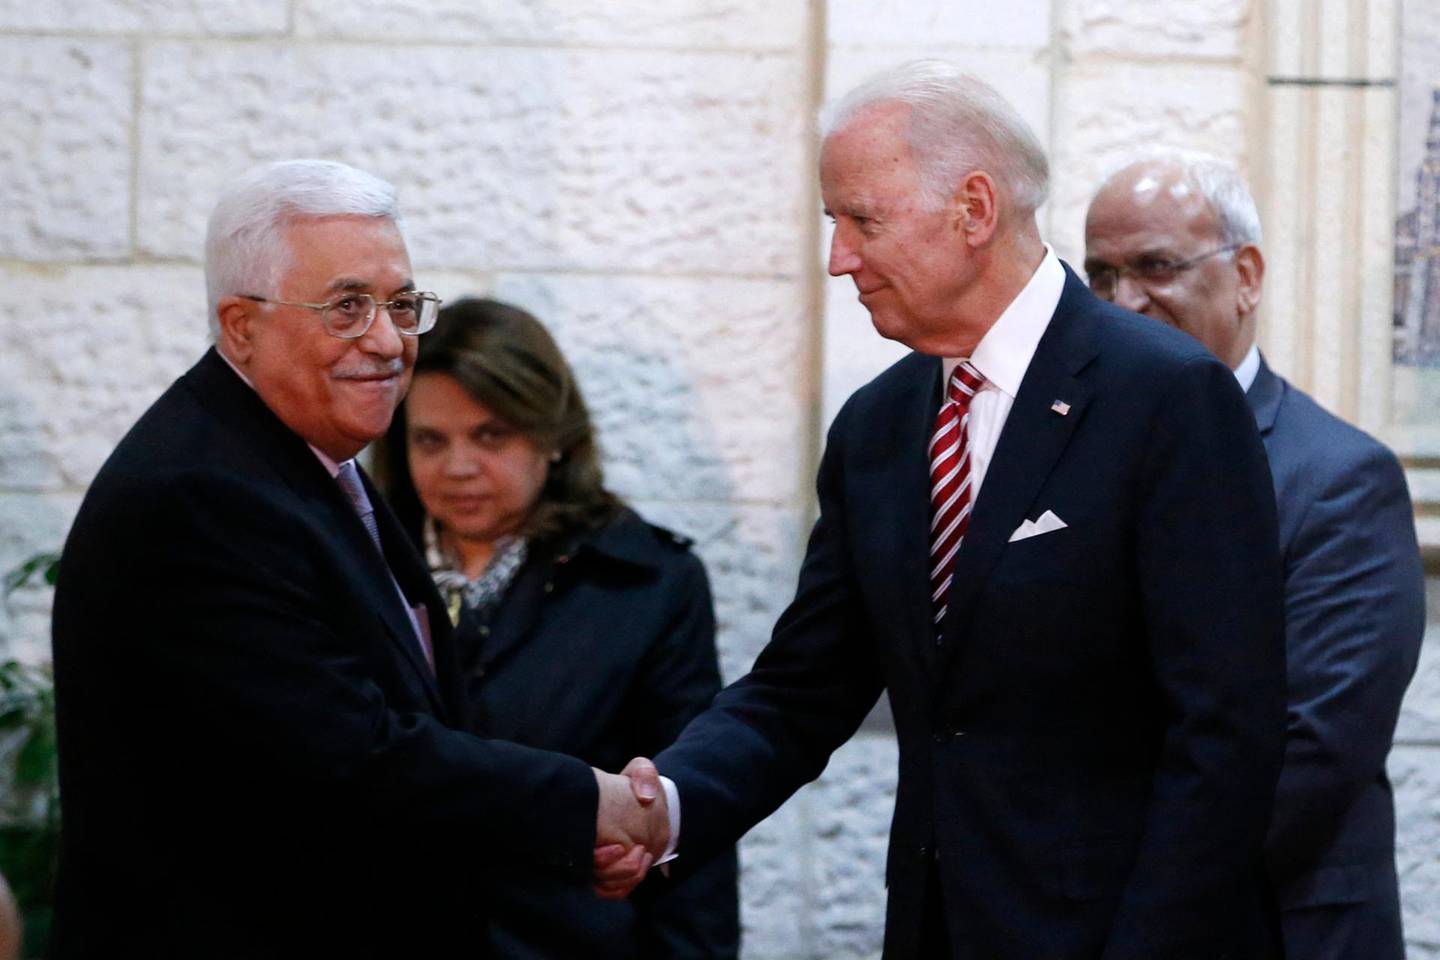 US Vice President Joseph Biden (R) shakes hands with Palestinian president Mahmud Abbas as they arrive for a meeting in the West Bank city of Ramallah on March 9, 2016. - Six separate attacks took place shortly before or after Biden's arrival the day before, including a stabbing spree on Tel Aviv's waterfront by a Palestinian who killed an American tourist and wounded 12 other people. (Photo by ABBAS MOMANI / AFP)